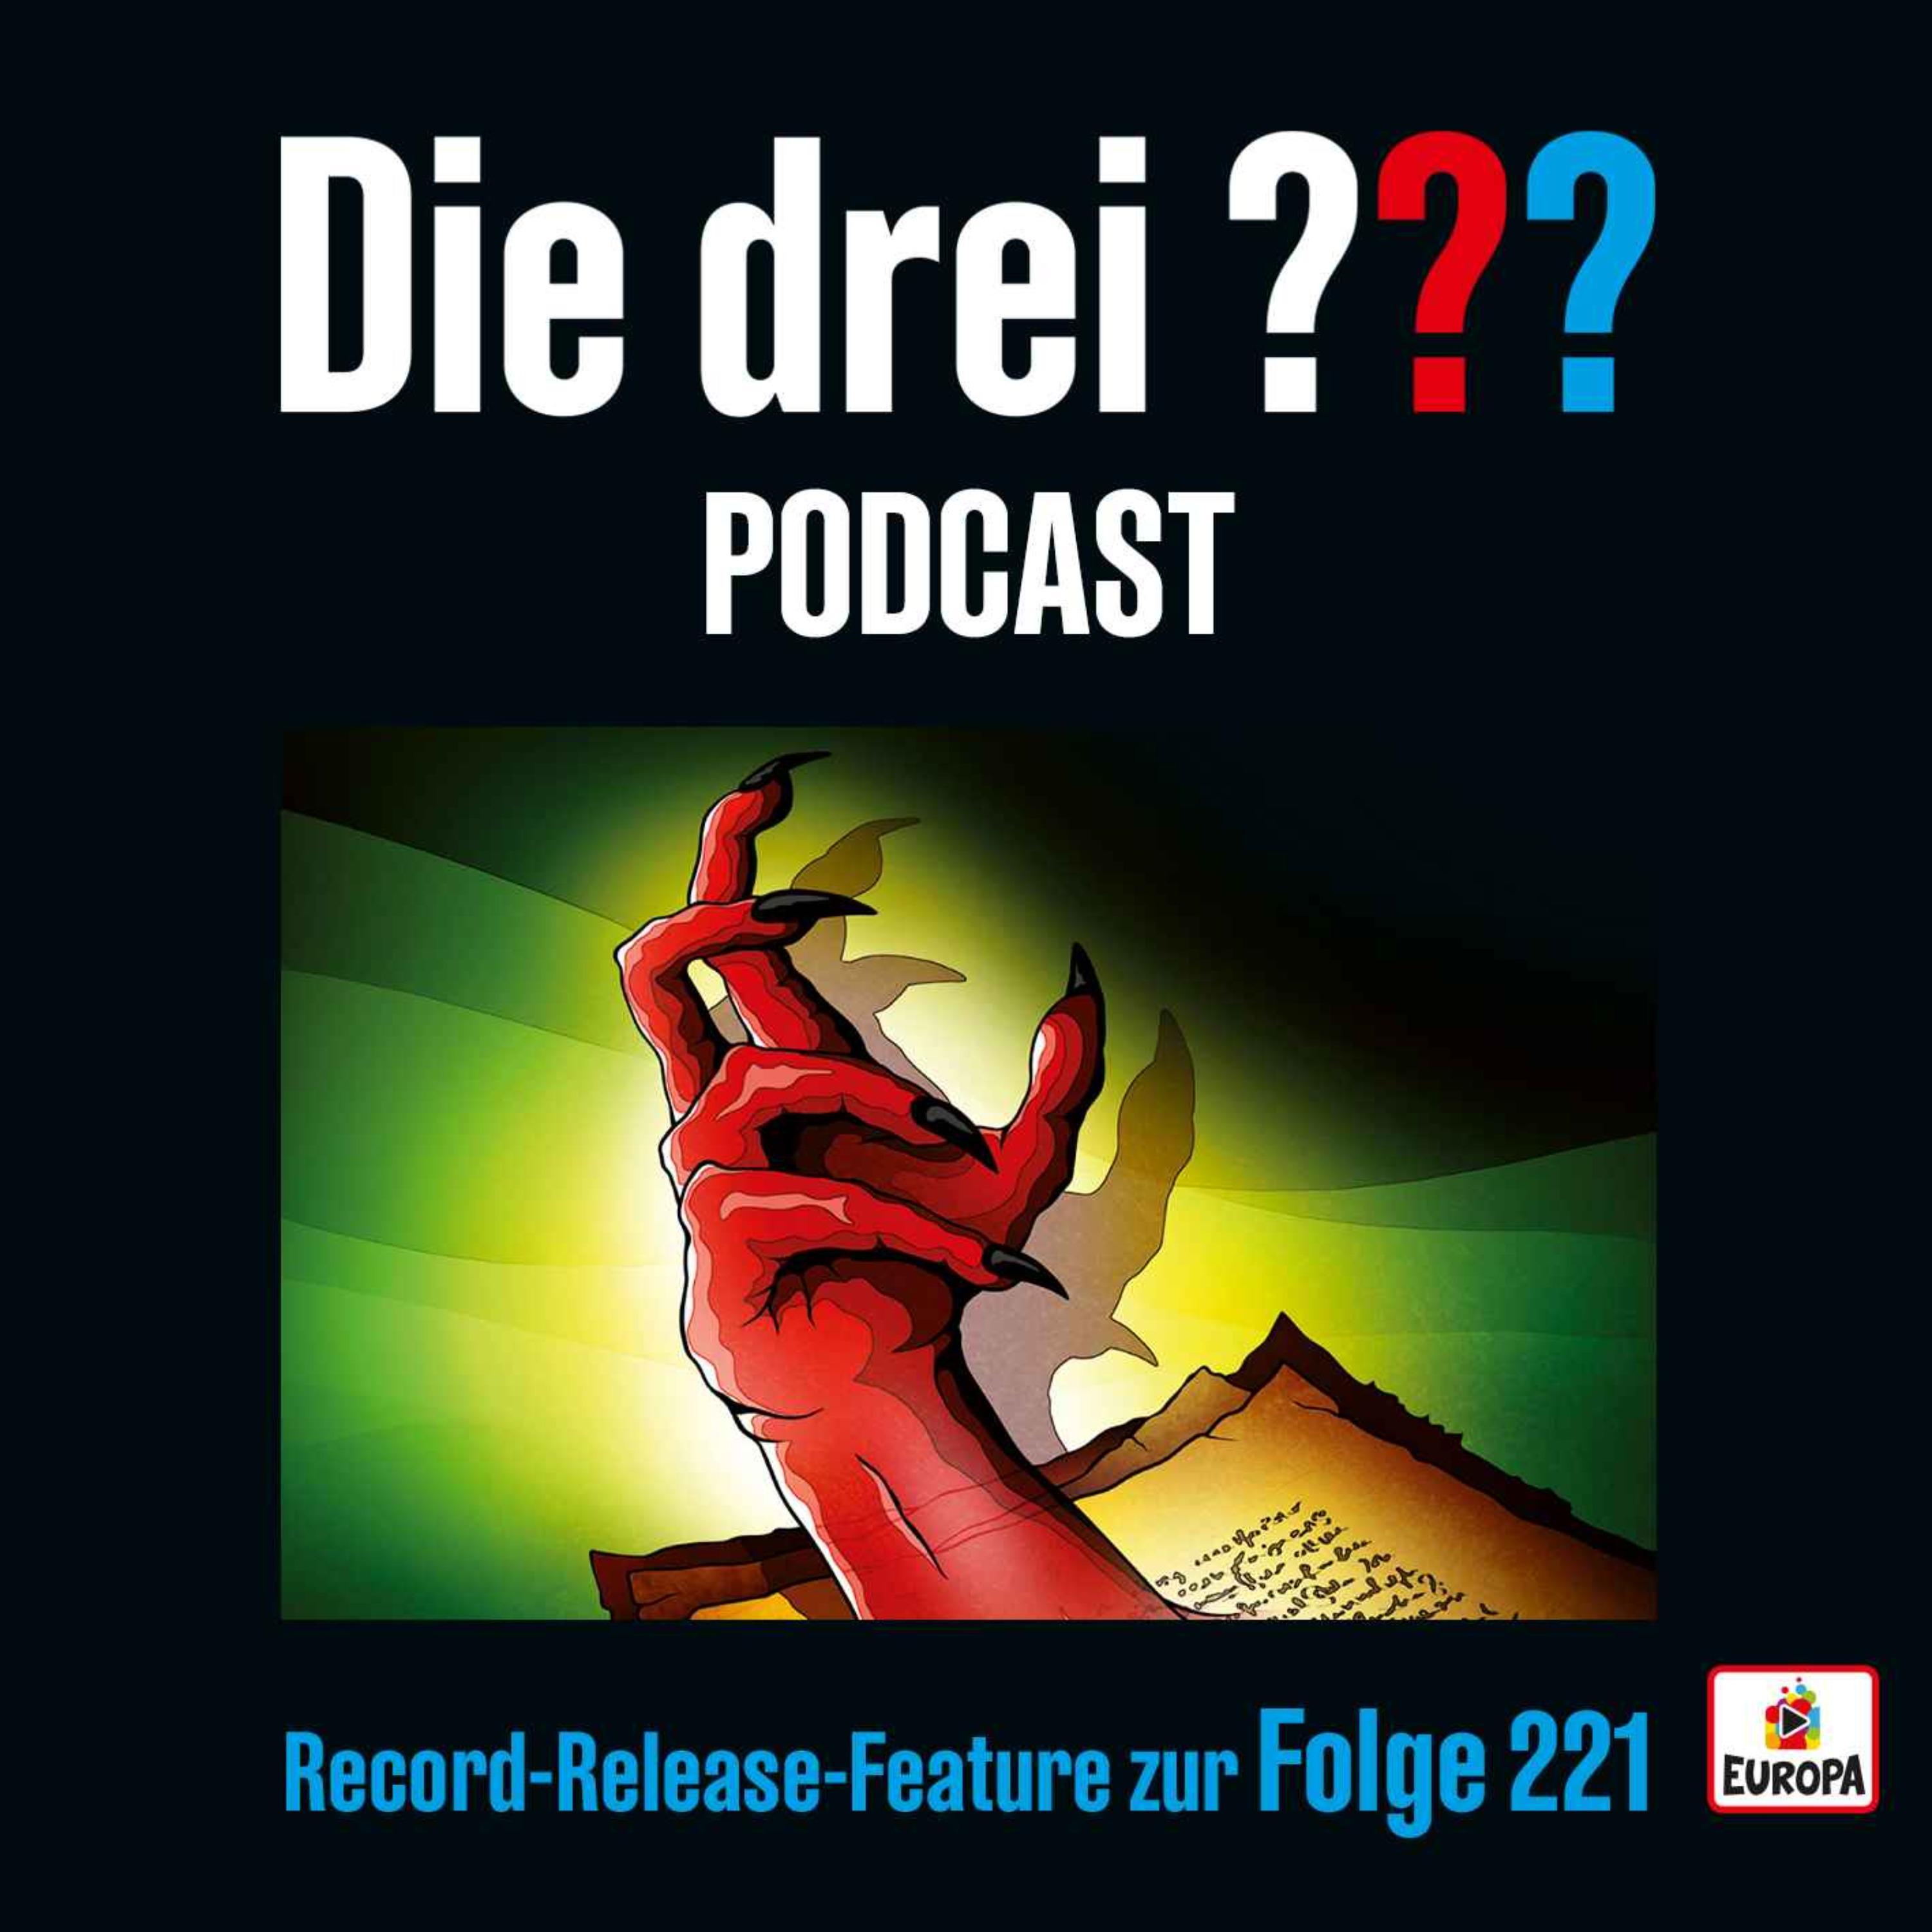 Record-Release-Feature zur Folge 221